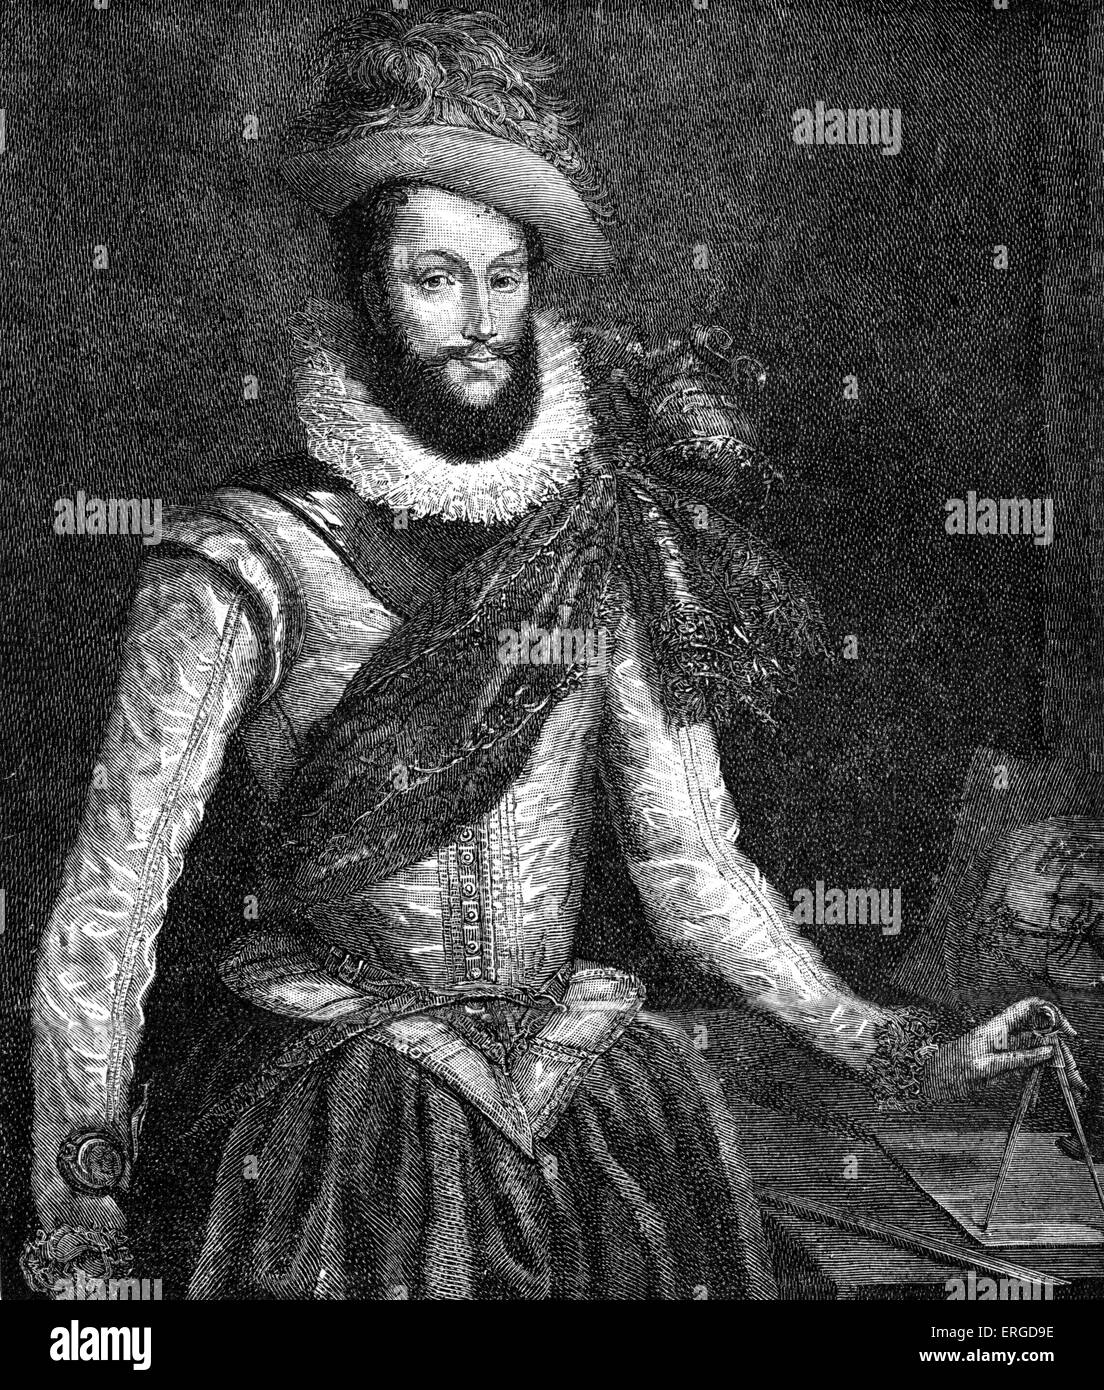 Sir Walter Raleigh. English writer, poet, courtier and explorer, c 1552 – 29 October 1618. Stock Photo